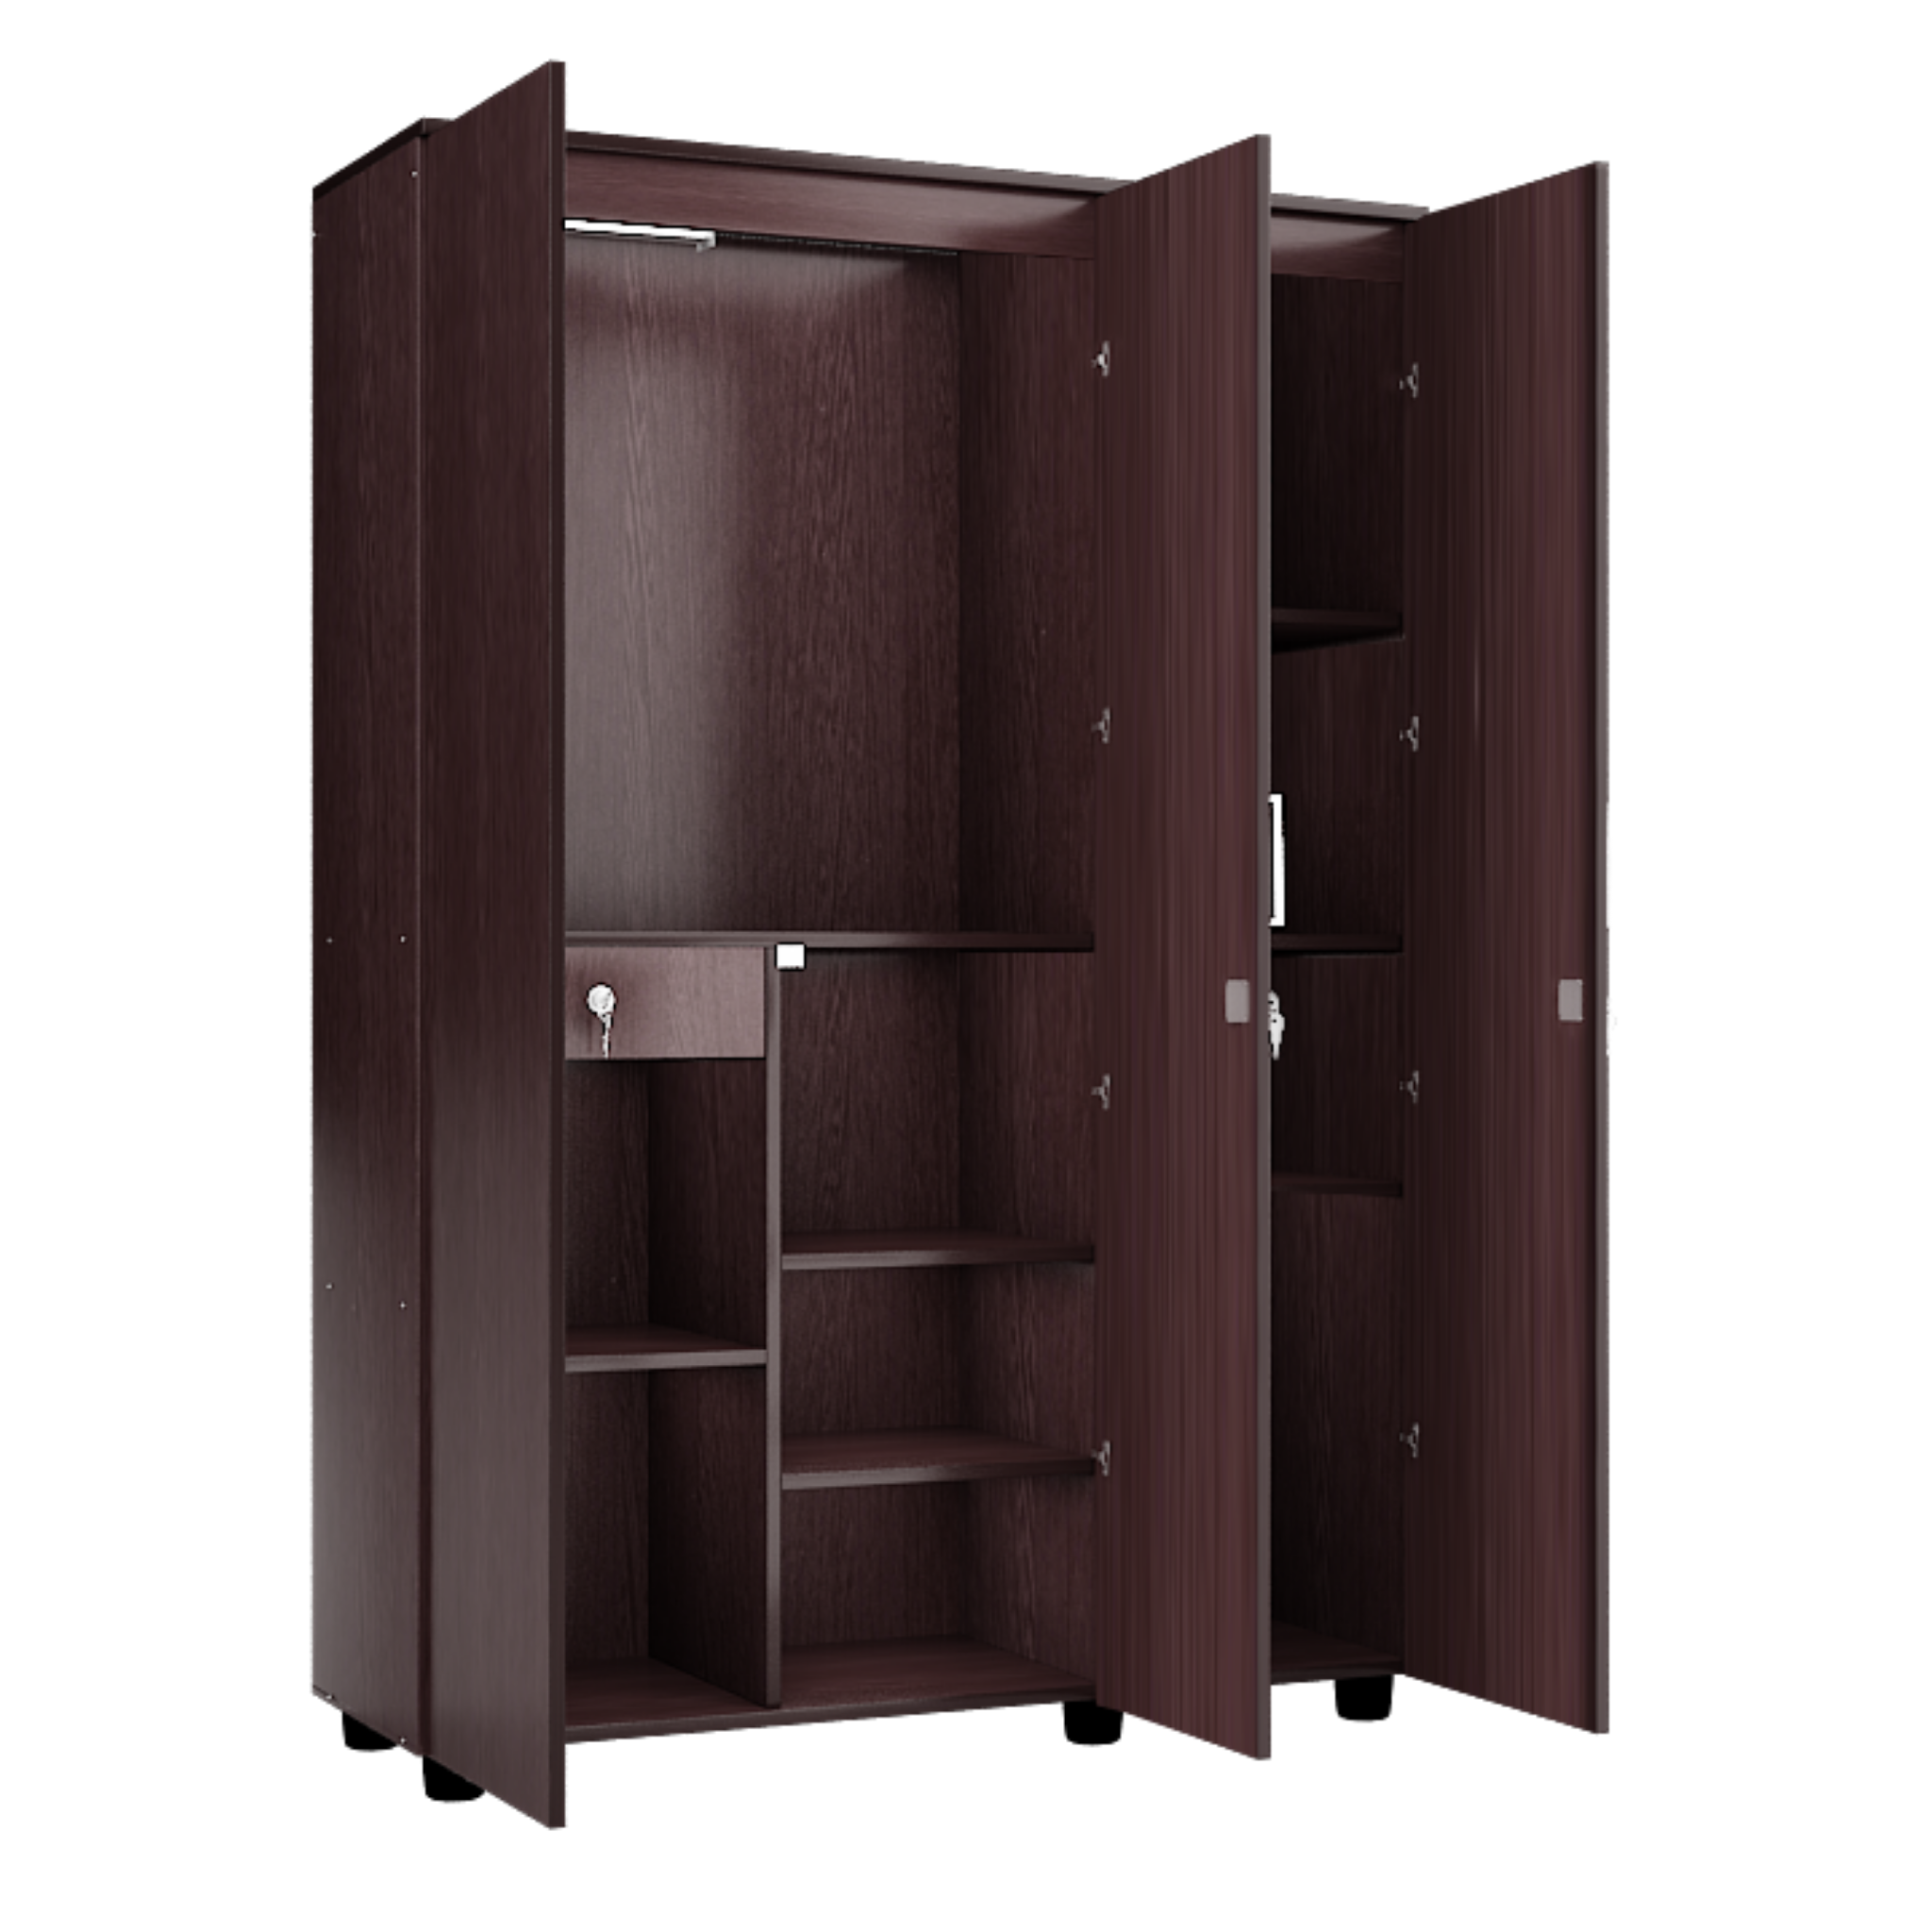 Super and Luxury Three  Door Wardrobe with Center Partition